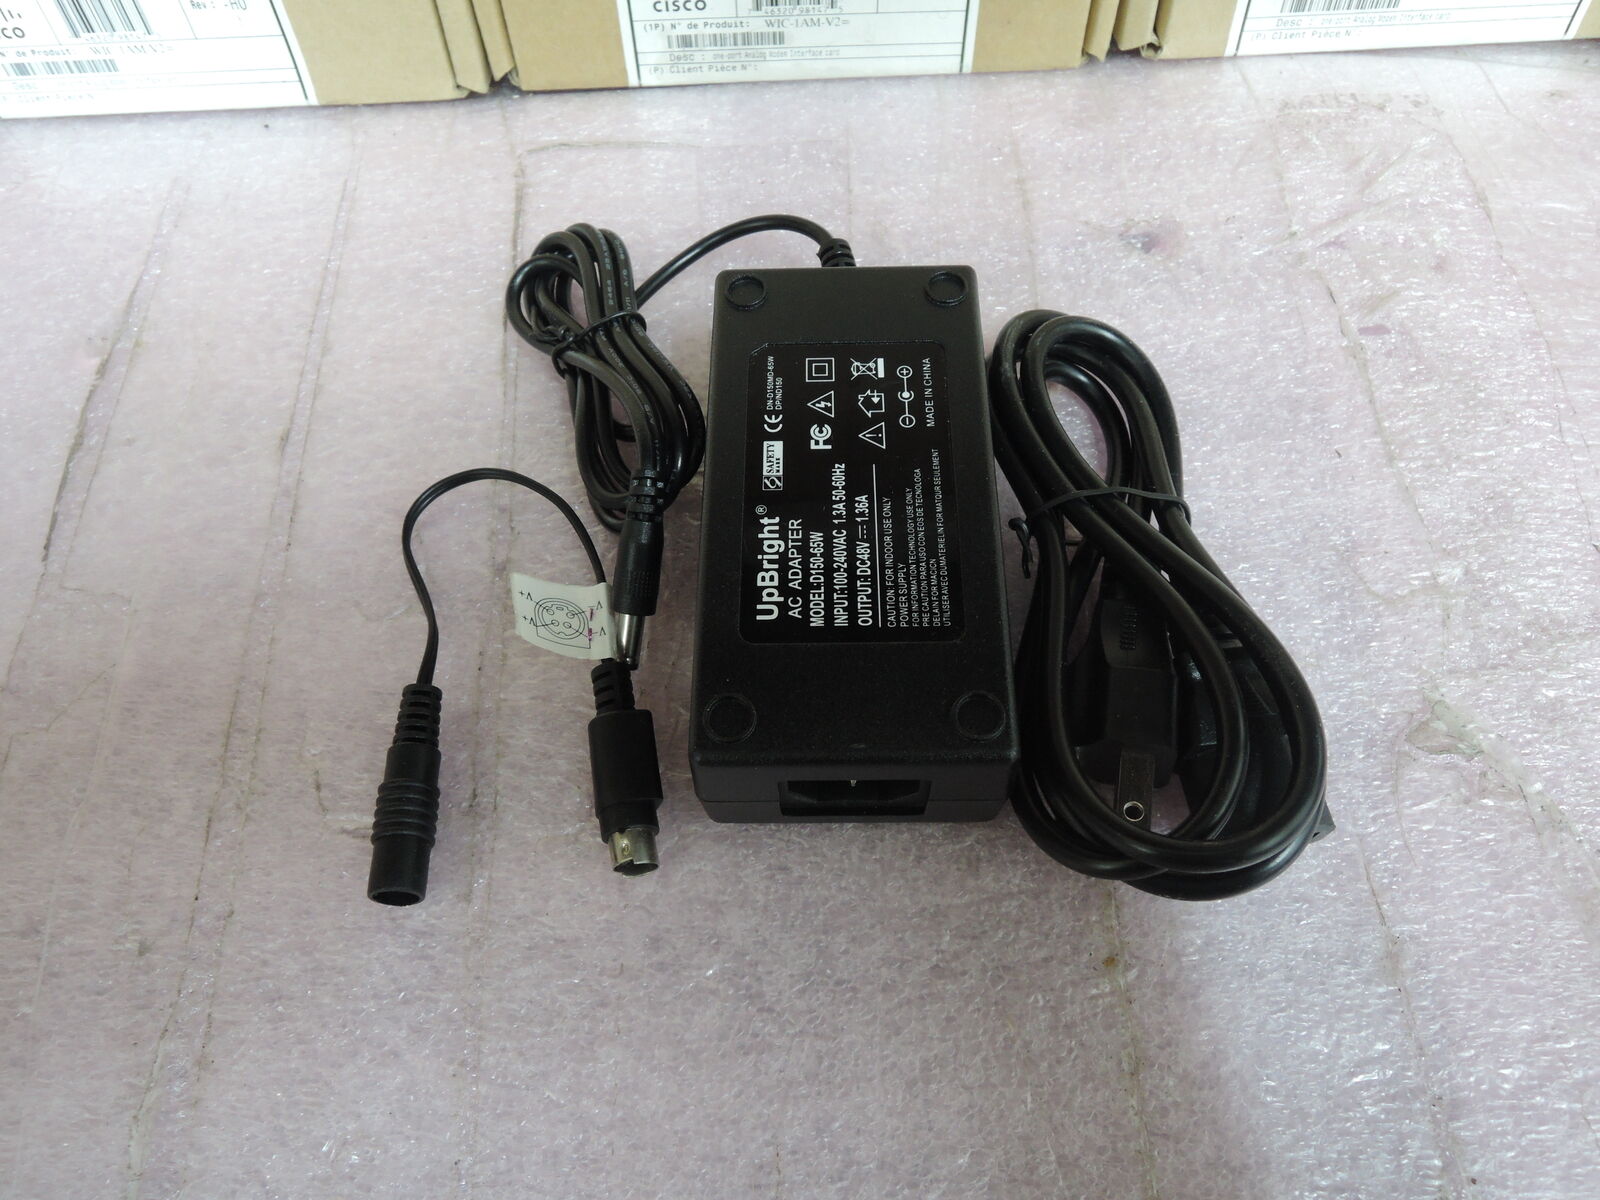 UpBright AC ADAPTER  D150-65W 48V-1.36 A  Adapter for Cisco SG110D-08HP &,see de